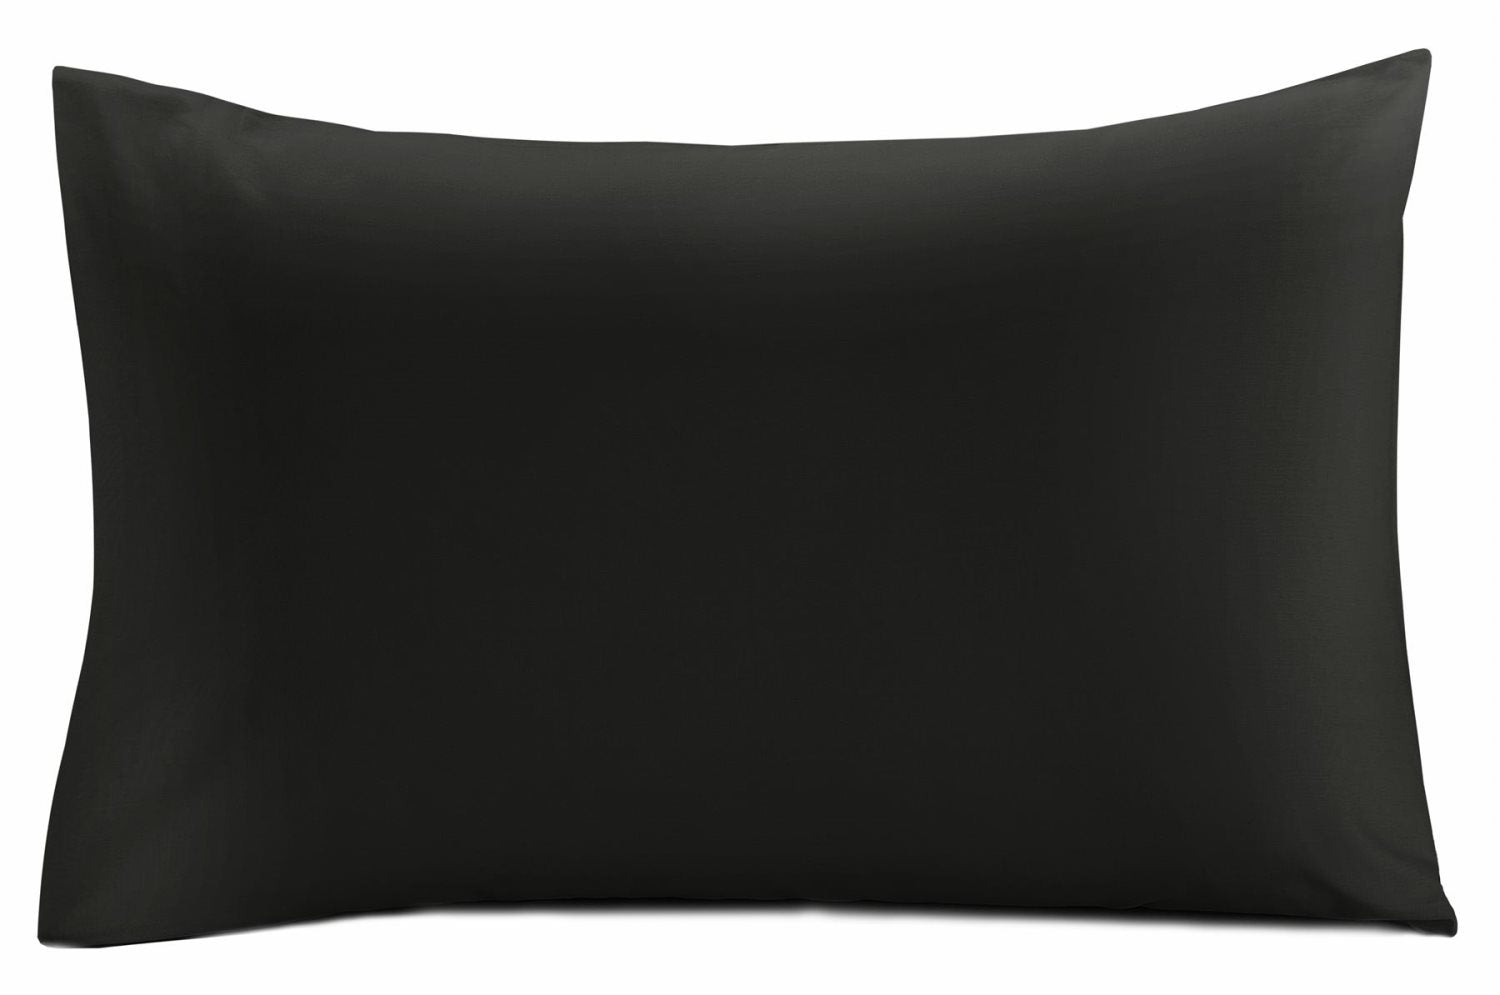 Emperor Pillowcases Black Pack of 2 Polycotton